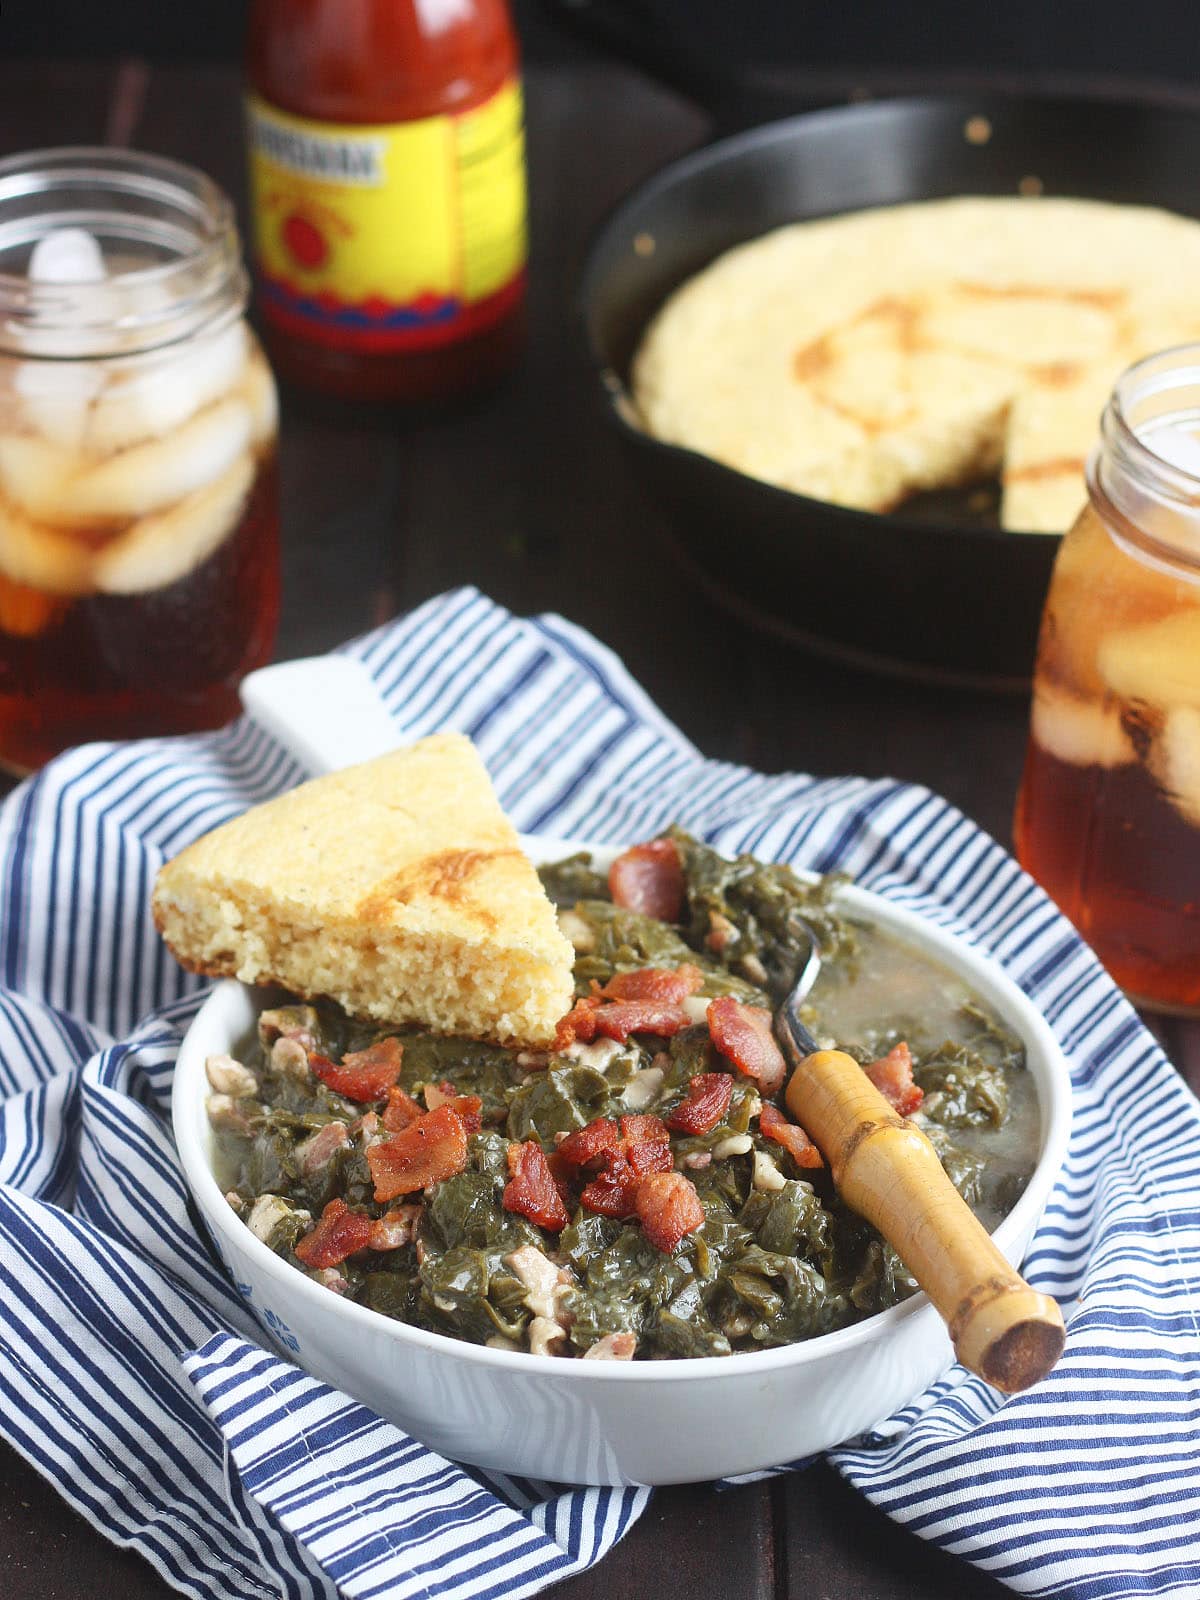 Turnip greens in a bowl with a wedge of cornbread on the side.